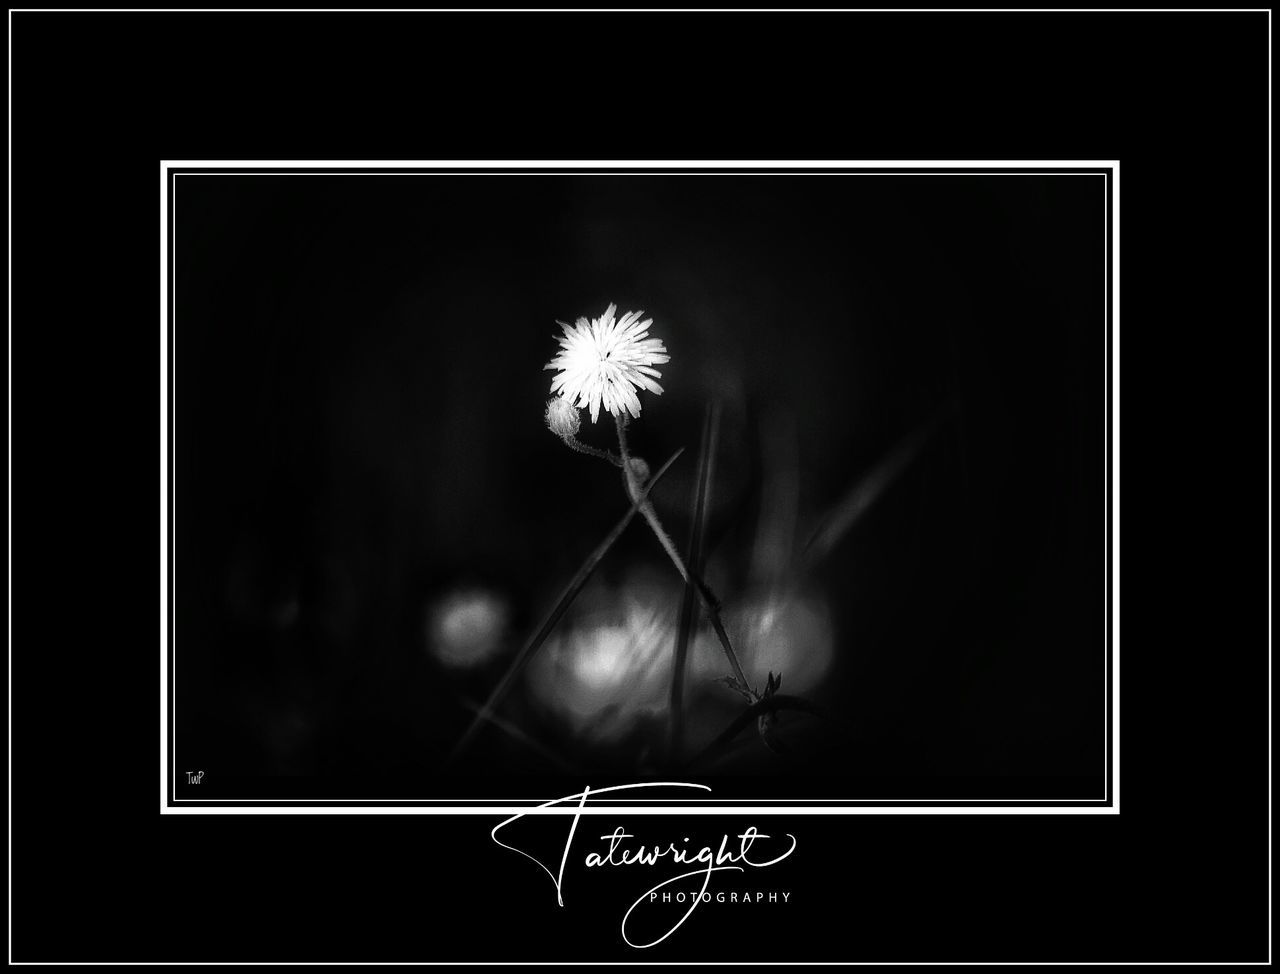 flower, plant, flowering plant, no people, indoors, nature, close-up, illuminated, creativity, auto post production filter, blackboard, studio shot, text, plant stem, board, dandelion, arts culture and entertainment, picture frame, motion, black background